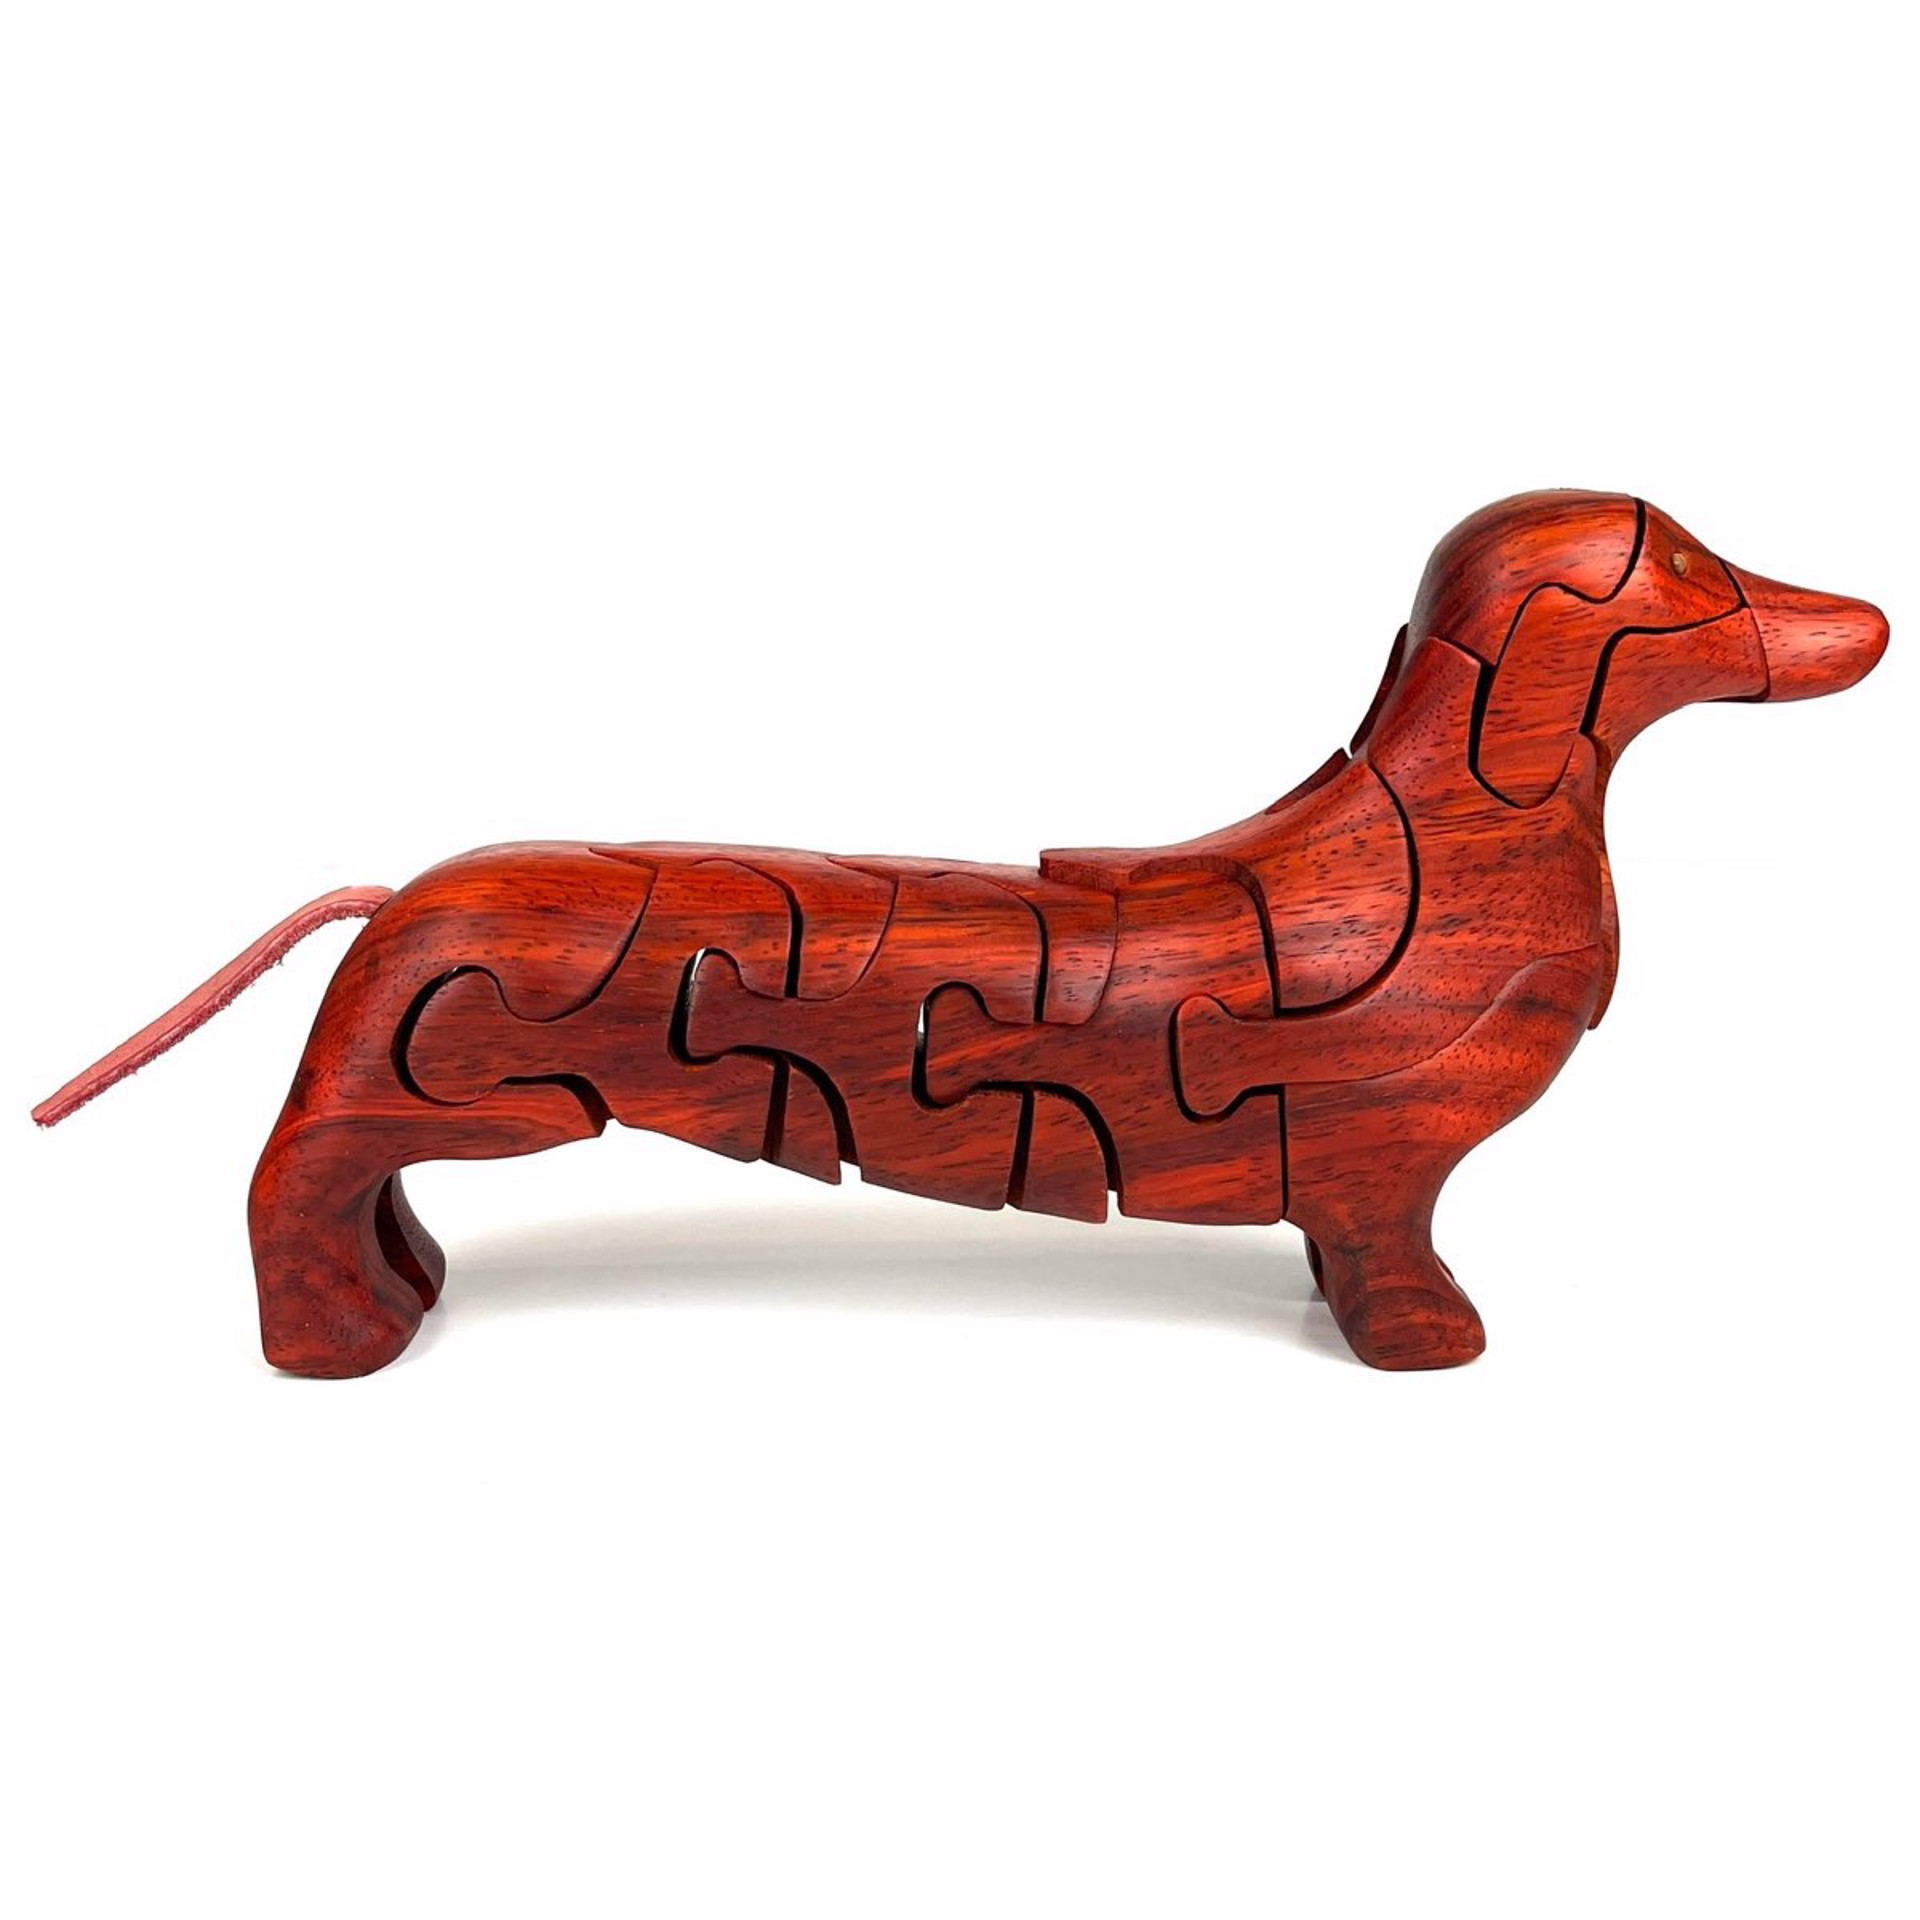 Dachshund with Bone Inside by Peter Chapman